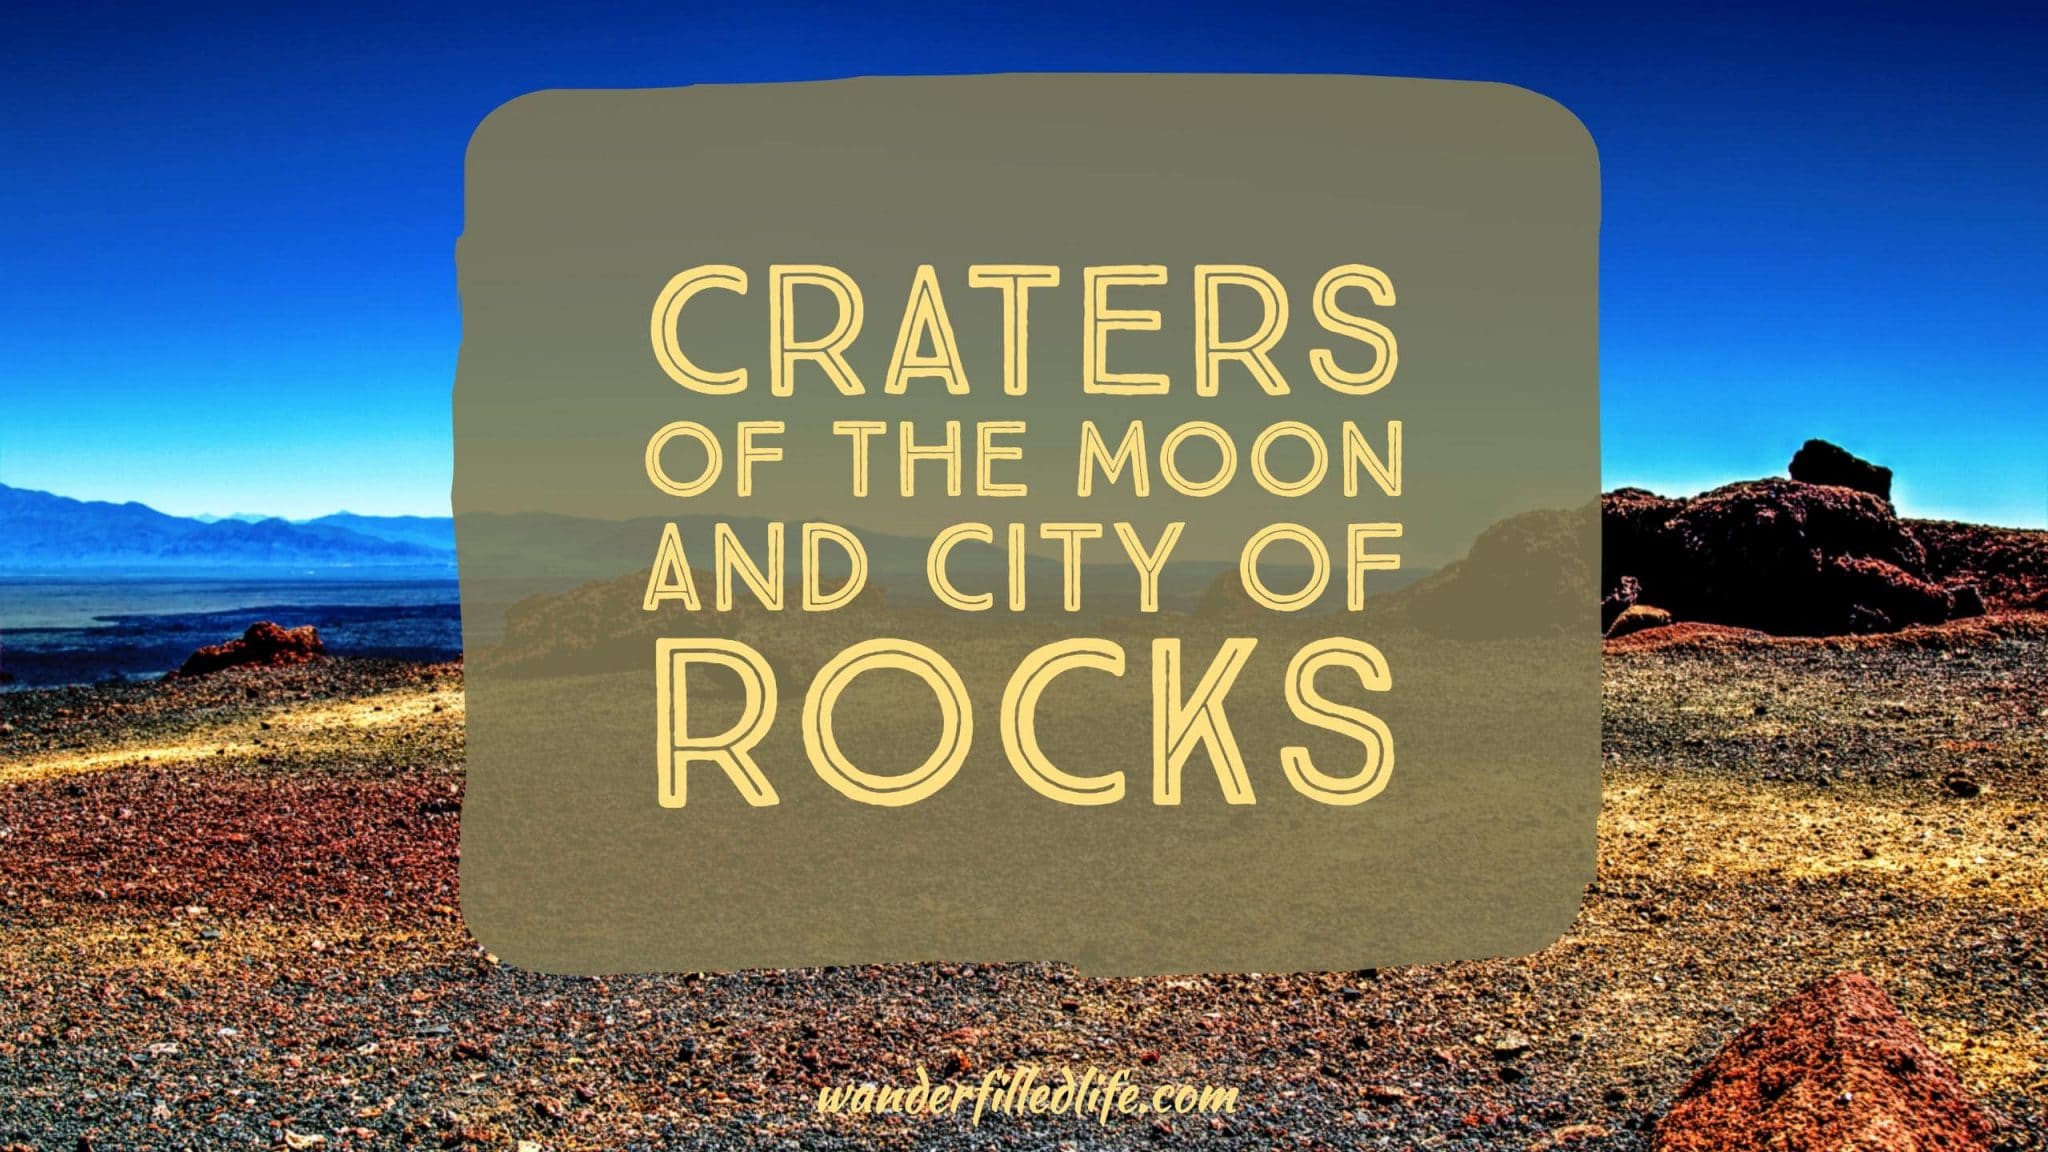 Craters of the Moon and City of Rocks